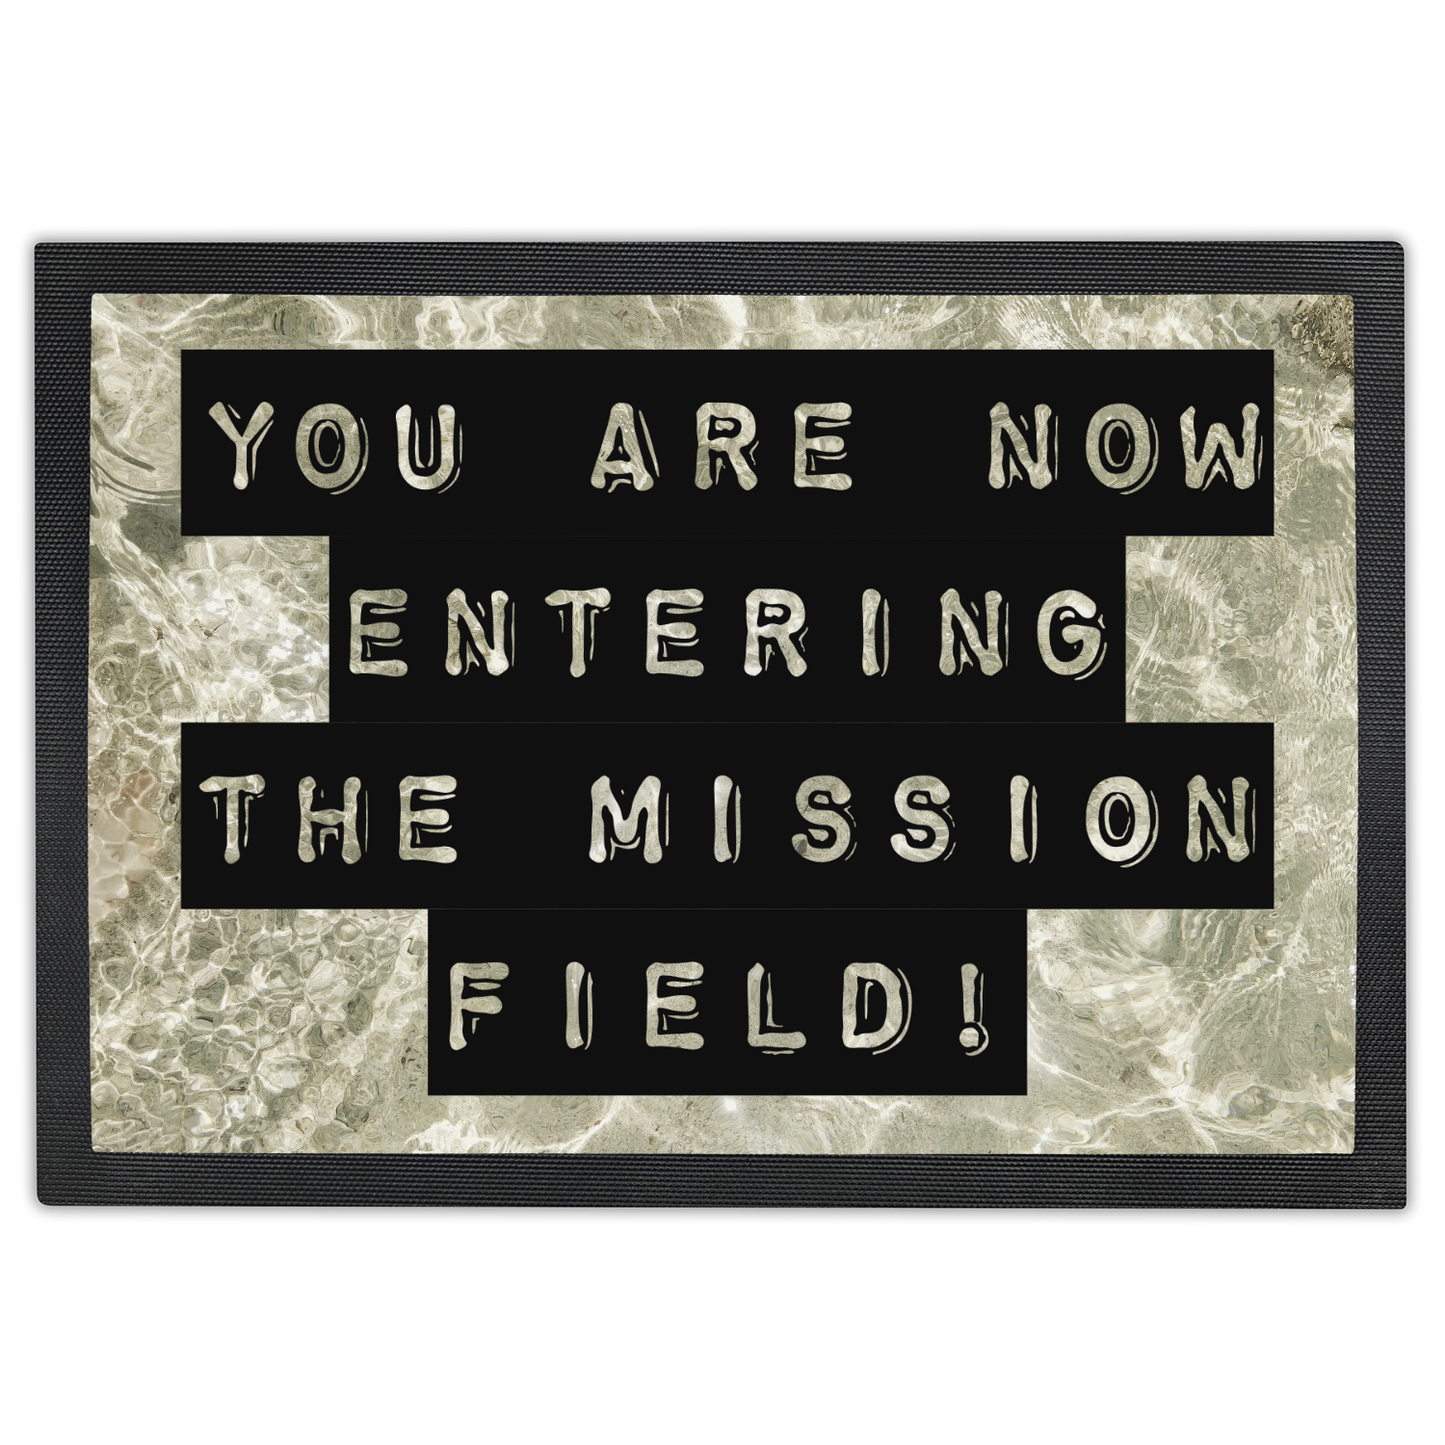 You Are Now Entering The Mission Field Doormat